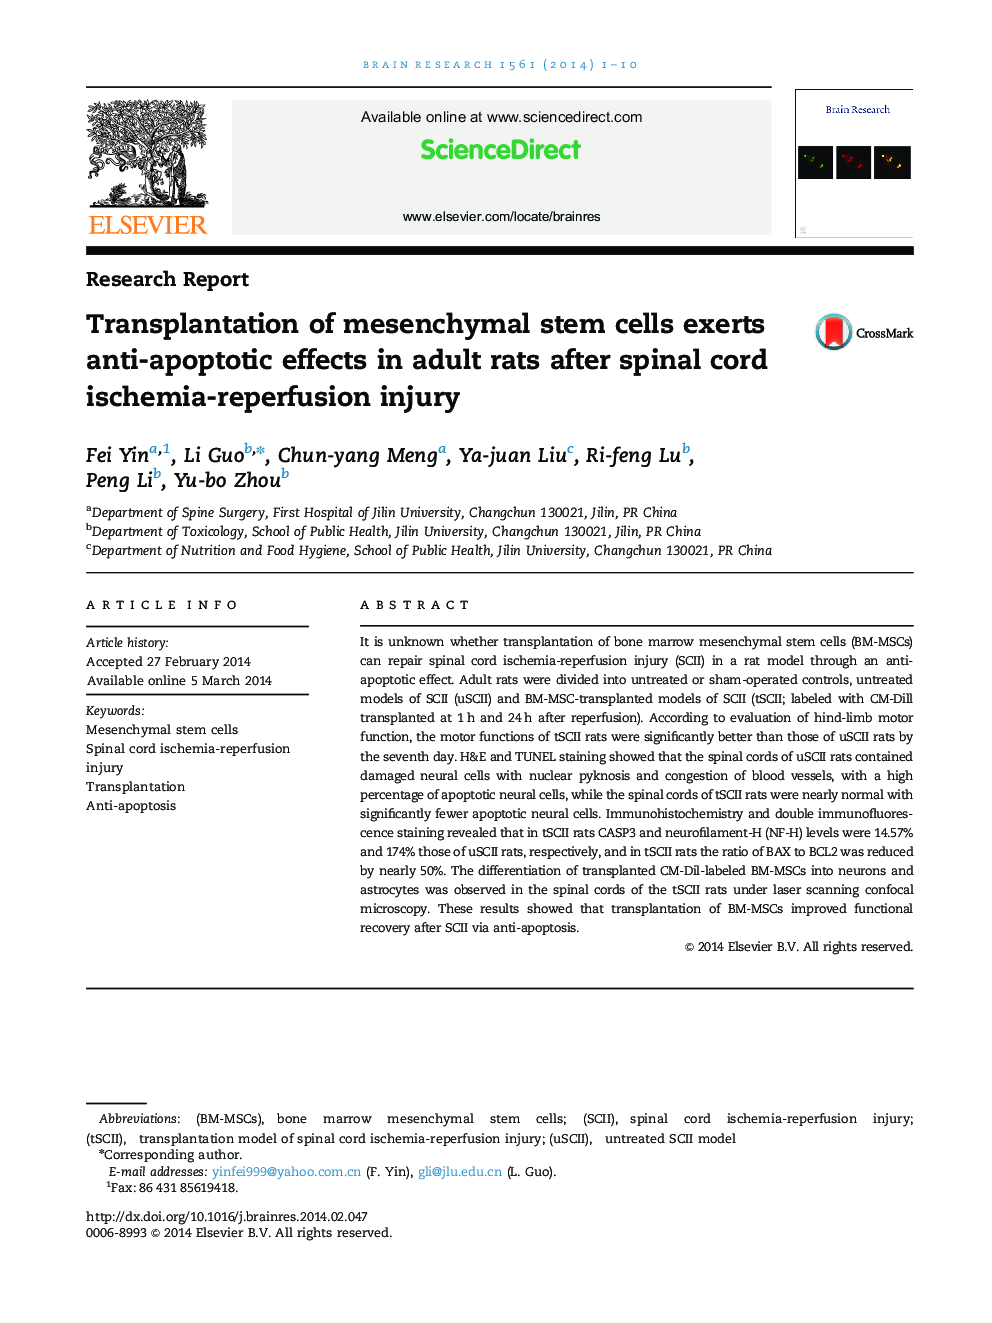 Research ReportTransplantation of mesenchymal stem cells exerts anti-apoptotic effects in adult rats after spinal cord ischemia-reperfusion injury